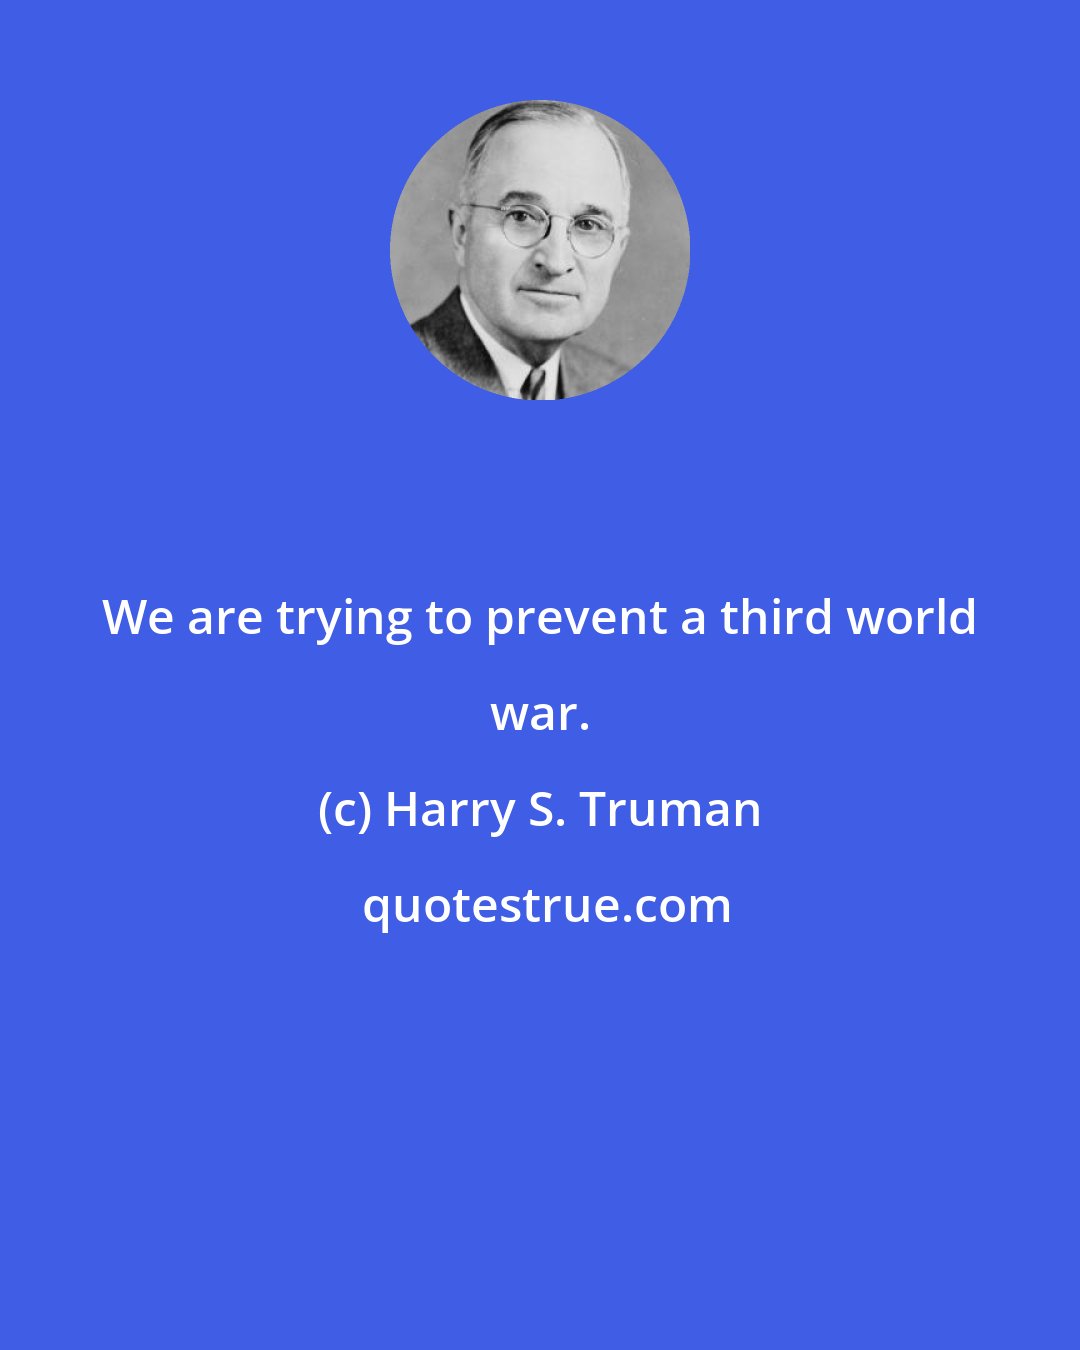 Harry S. Truman: We are trying to prevent a third world war.